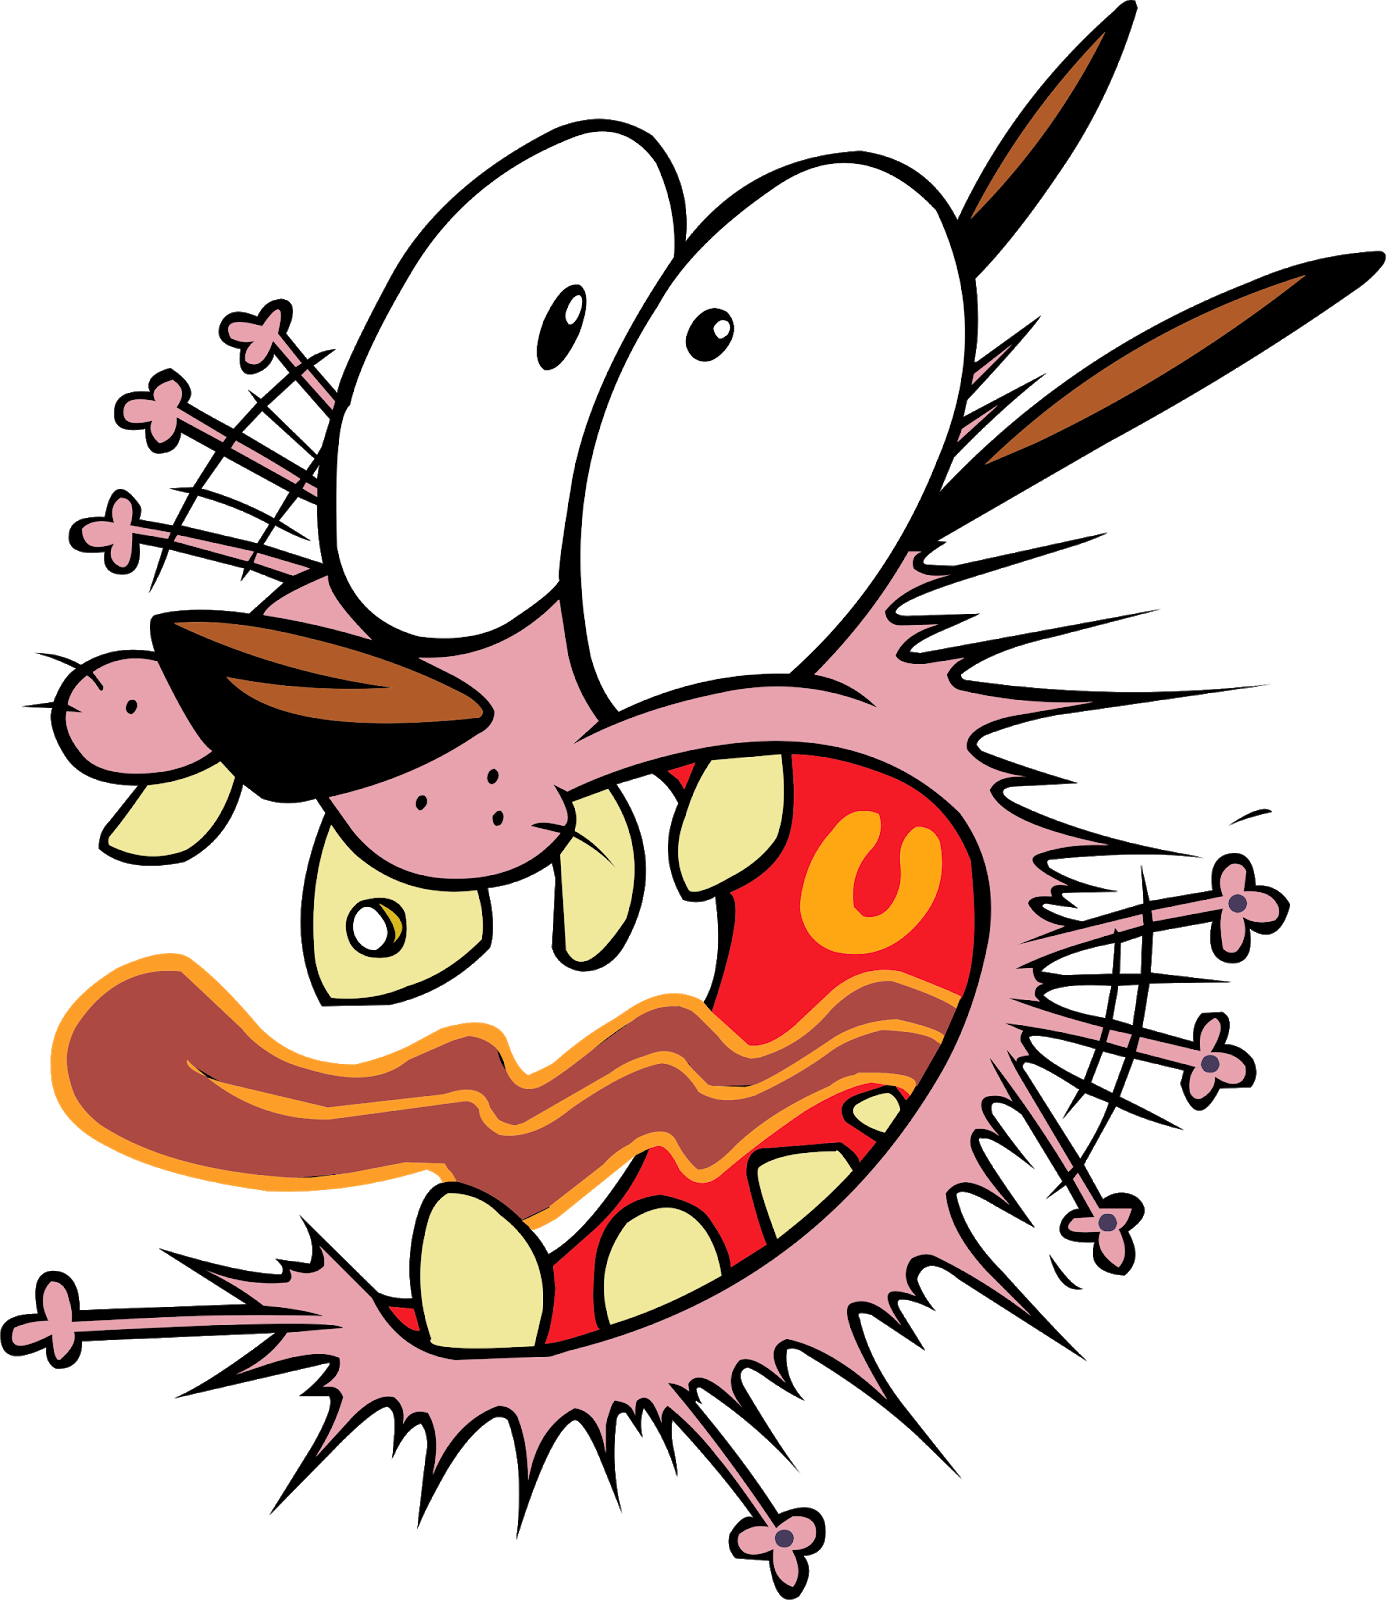 394-3948862_courage-the-cowardly-dog-cartoon-character-courage-courage.png